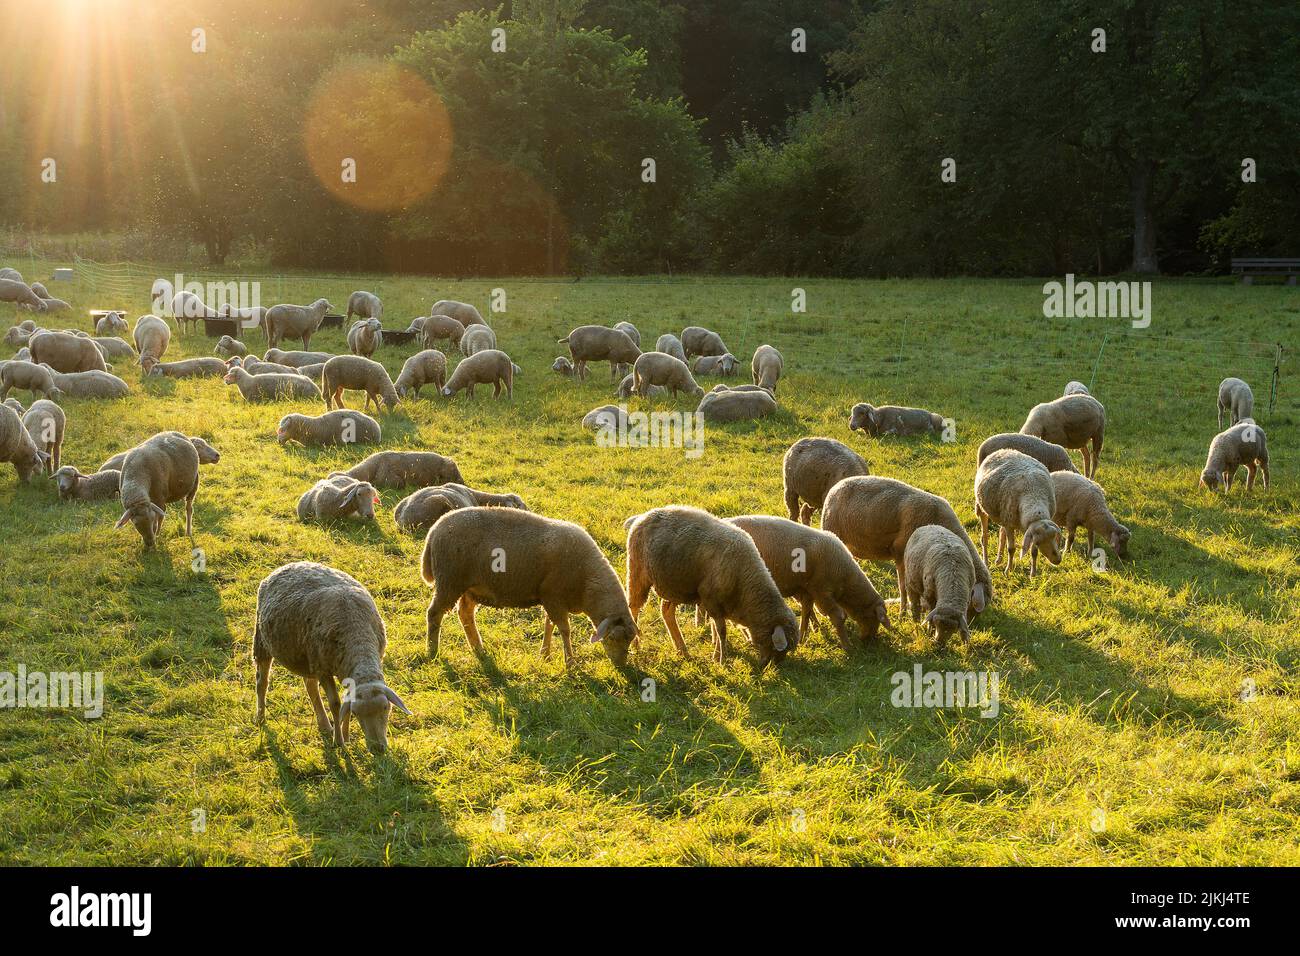 Weimar, Thuringia, park at the river Ilm, flock of sheep in evening light, backlight with light reflections Stock Photo